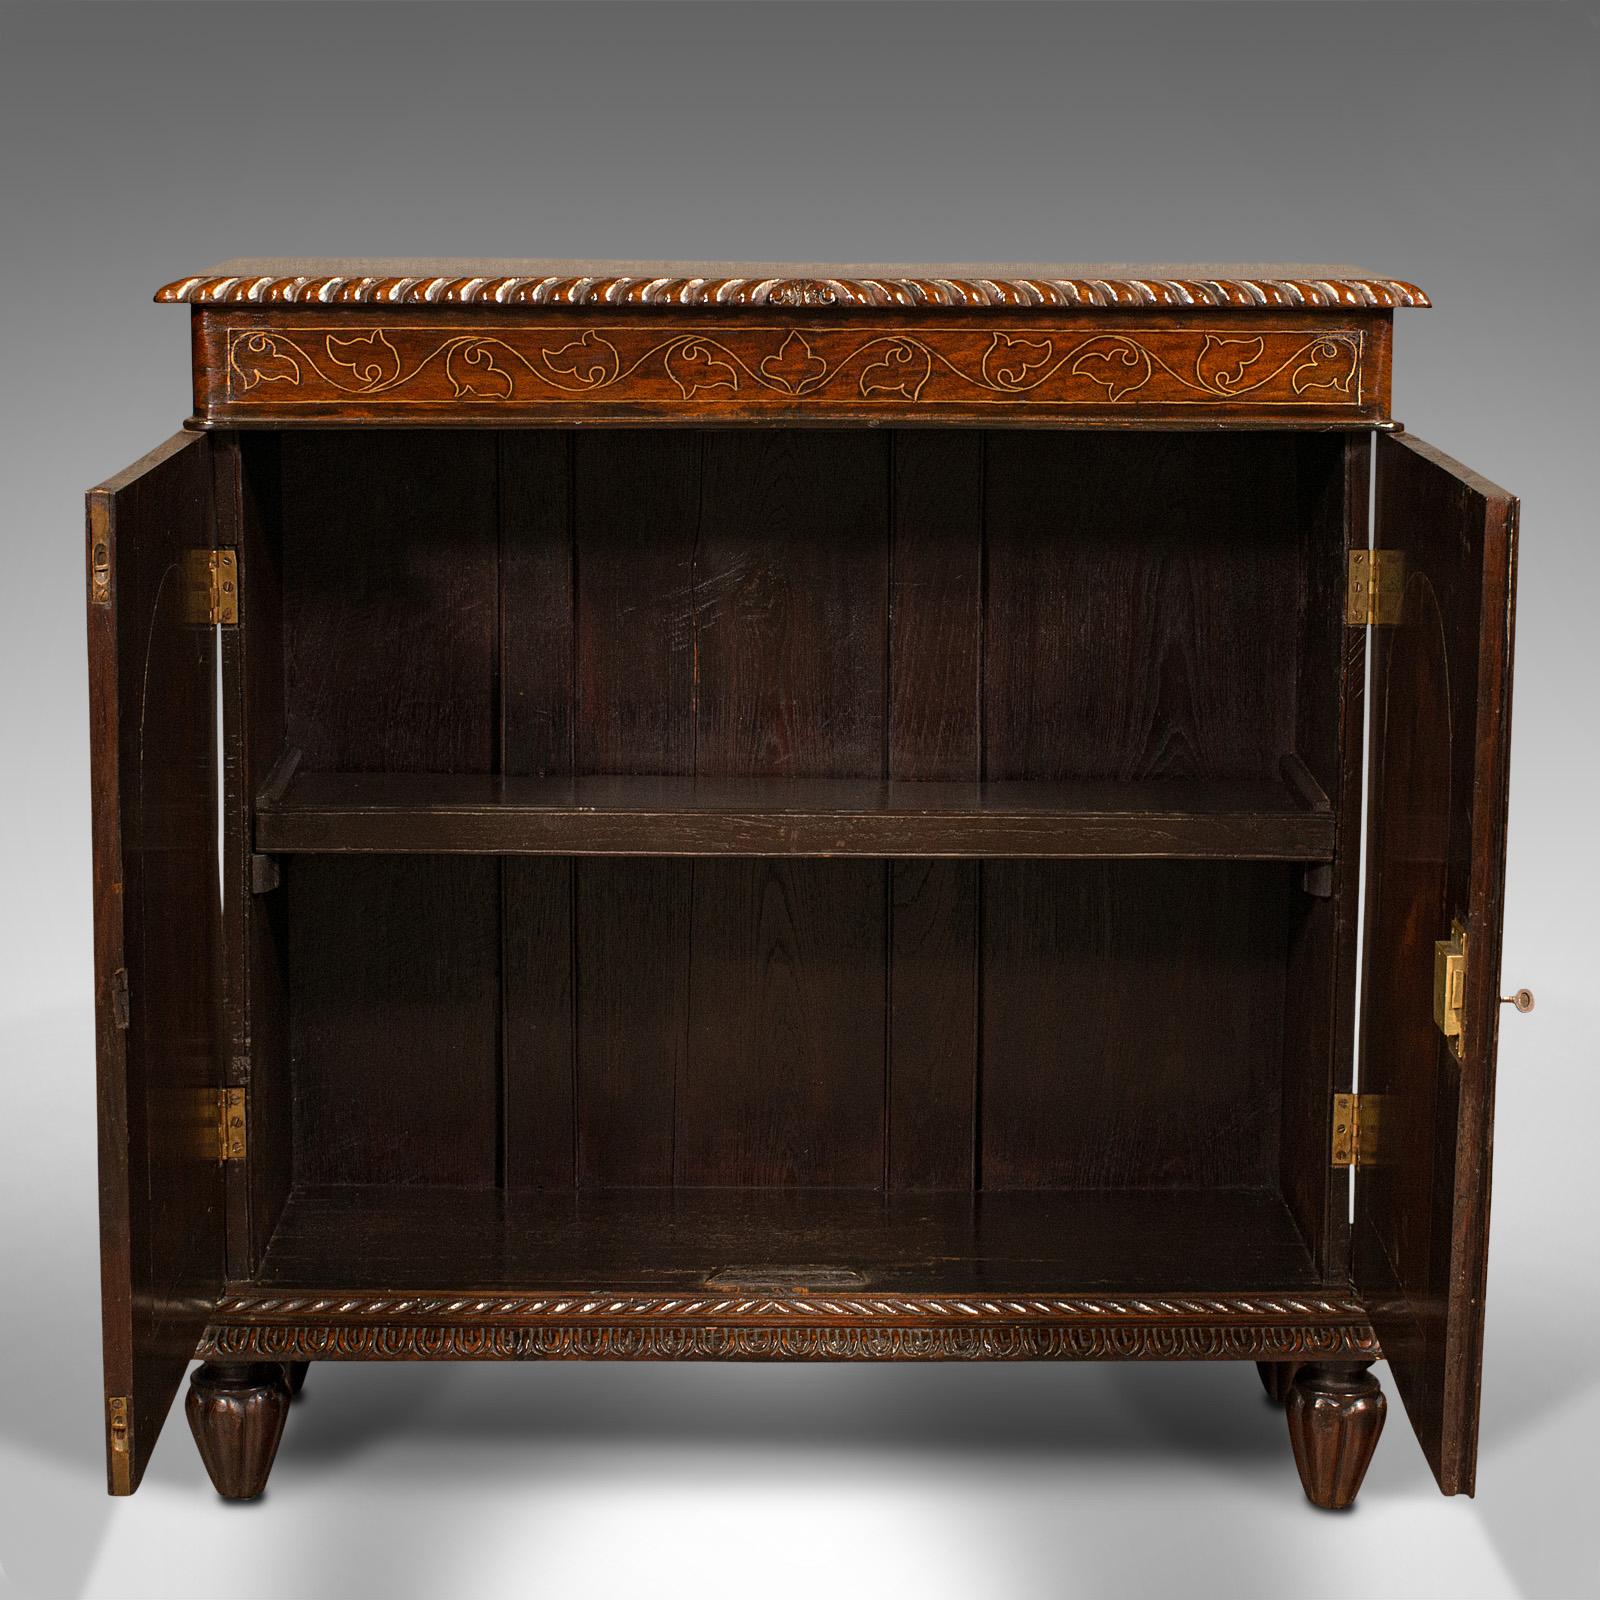 This is an antique colonial side cabinet. An Anglo-Indian, rosewood drinks or hall cupboard, dating to the William IV period, circa 1830.

Of striking appearance, with deep colour and shimmering brass inlays
Displaying a desirable aged patina and